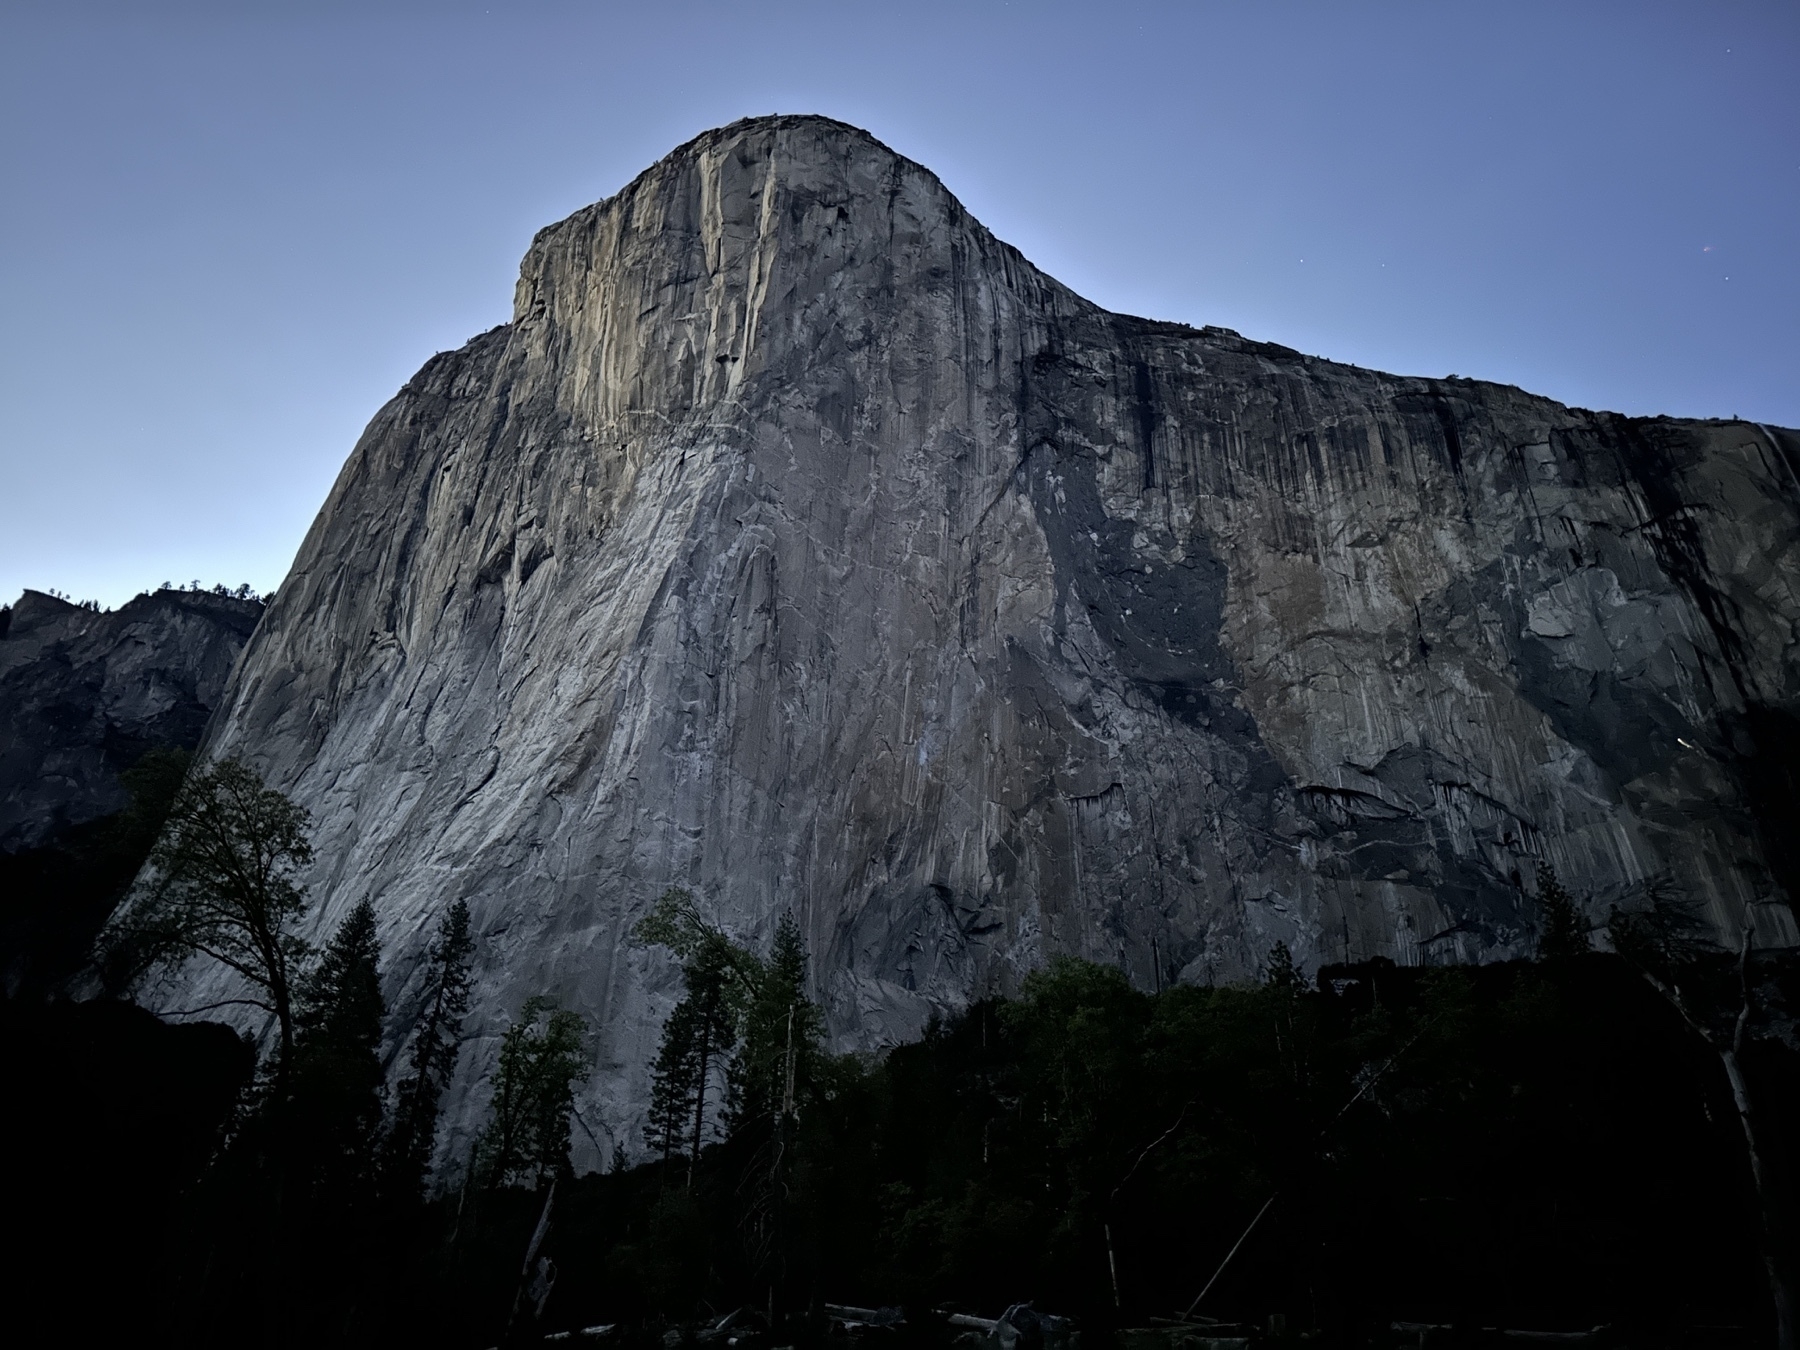 El Capitan. The largest rock on earth towers above Yosemite Valley, after sunset. The headlamp of a climber can be seen about halfway up on the eastern shoulder.